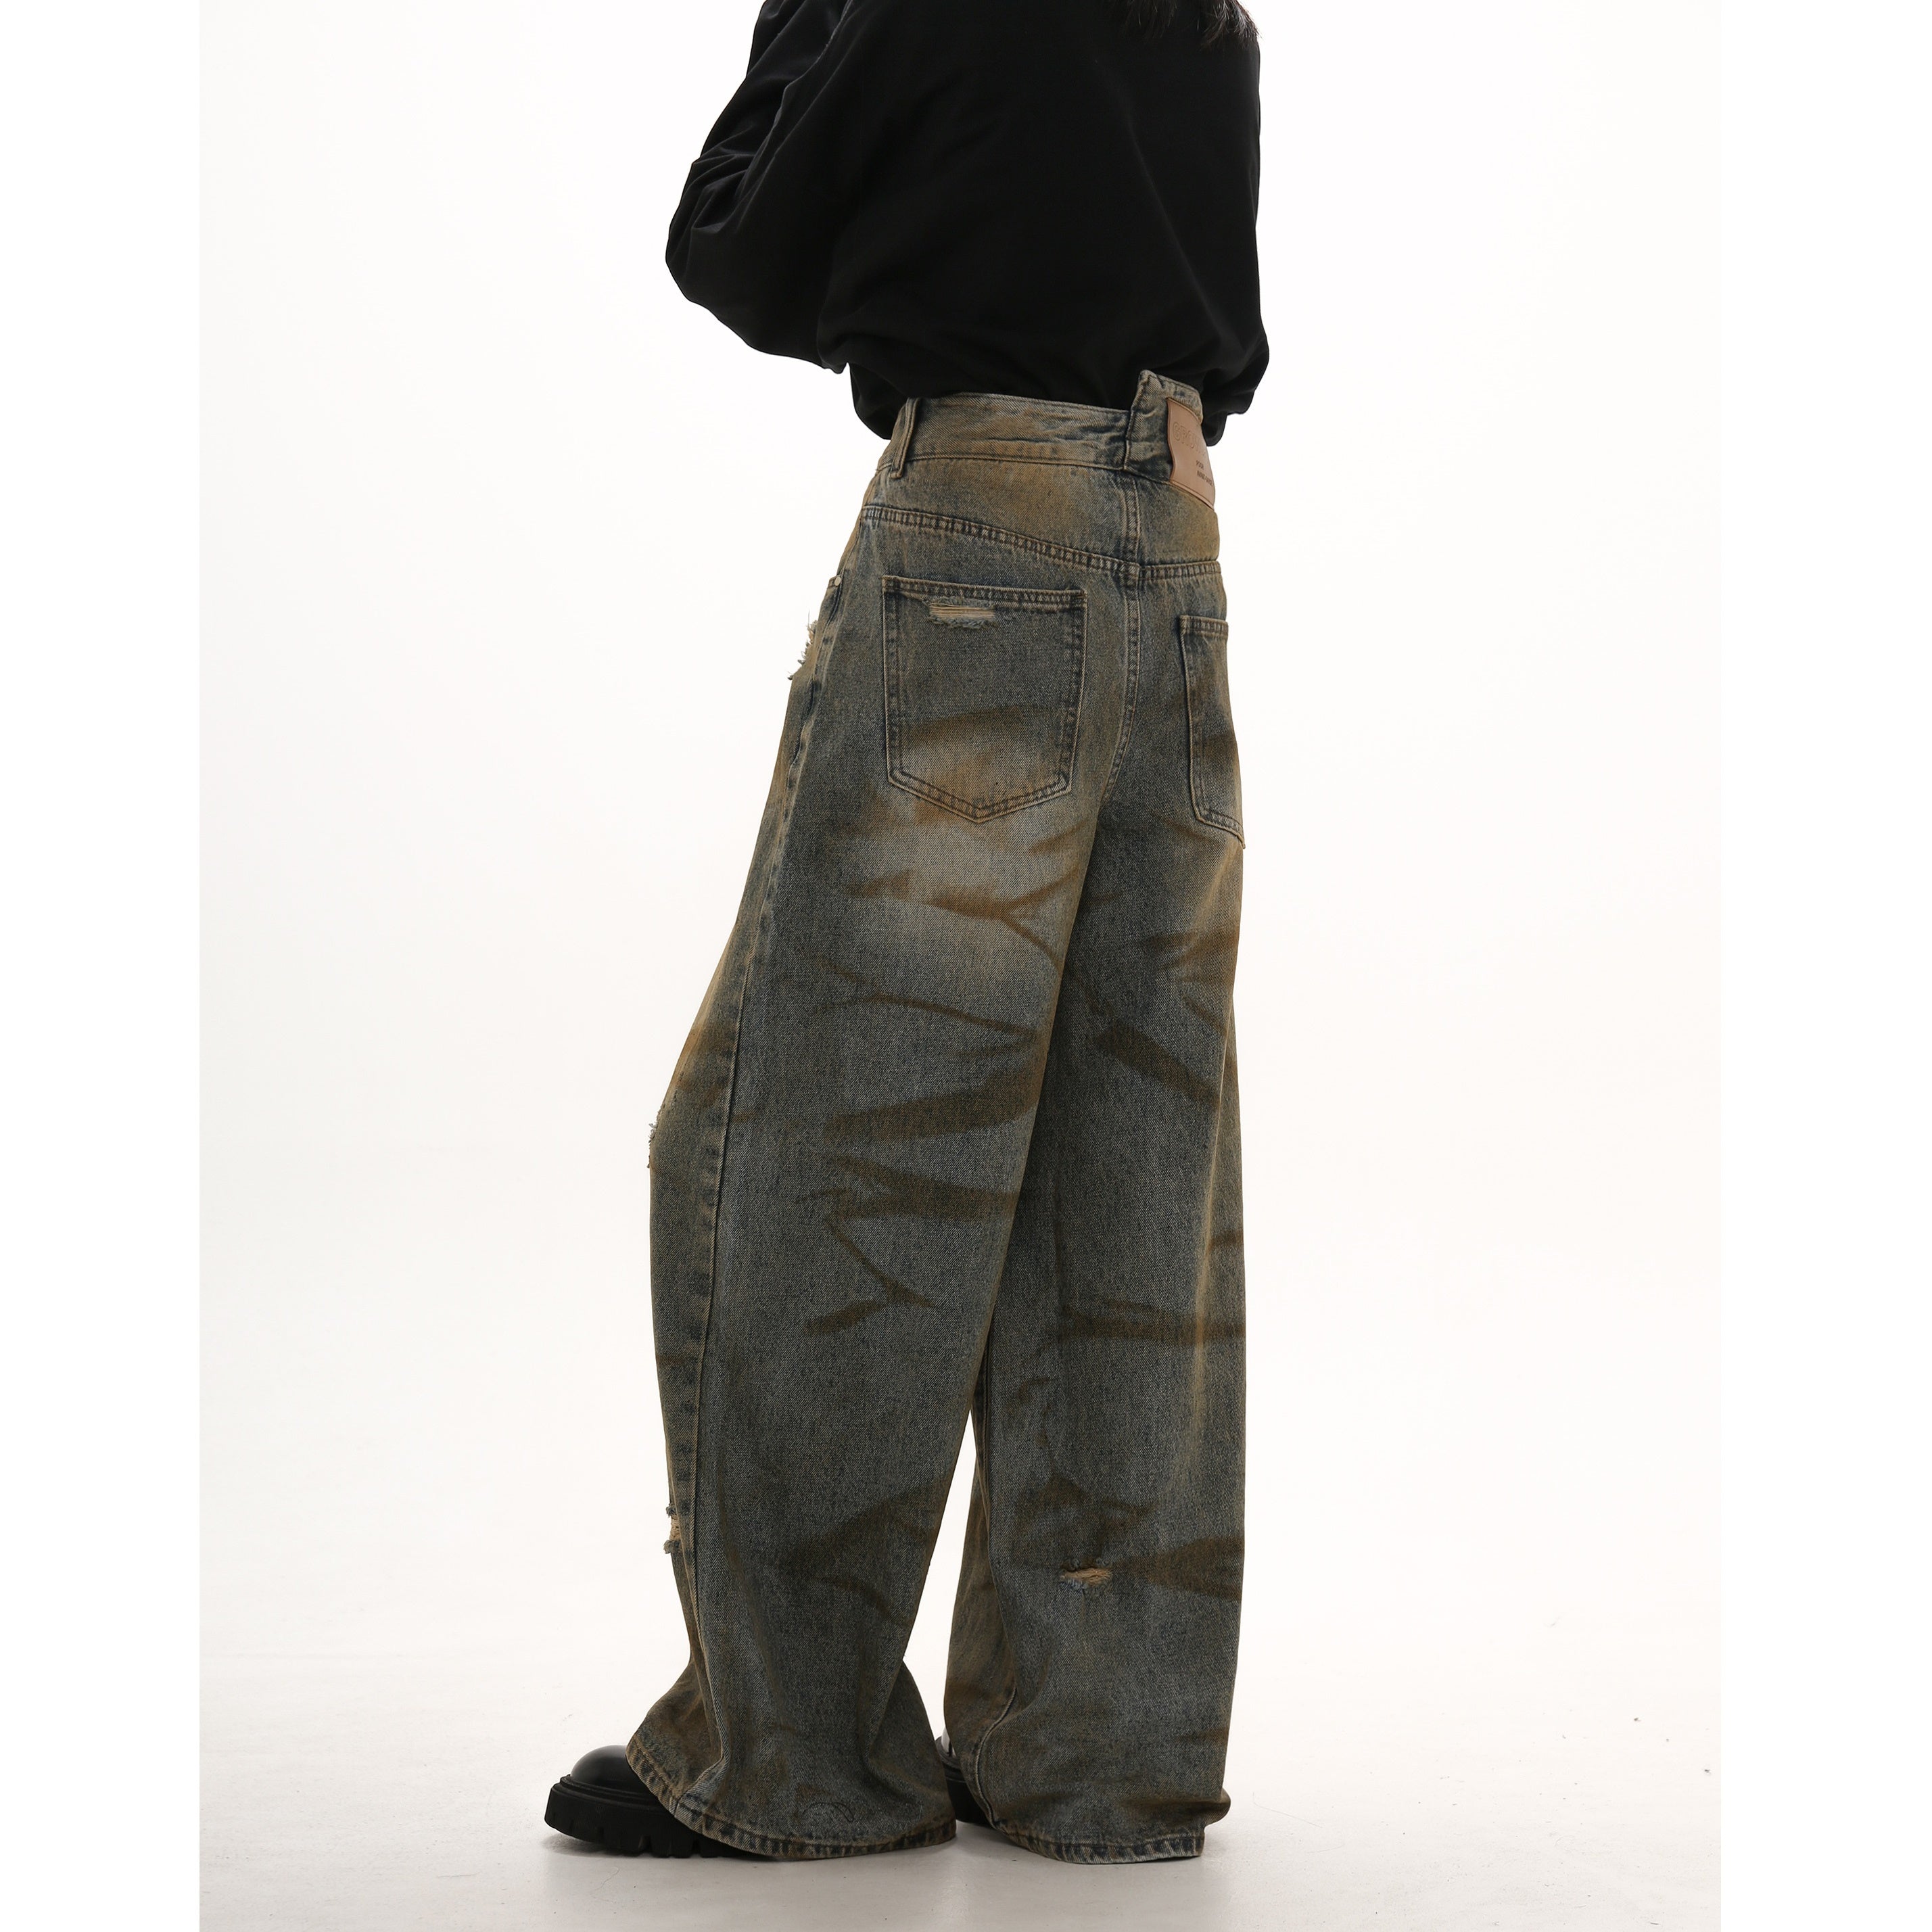 Wasteland Style Yellow Clay Dirty Distressed Wide-leg Jeans GB7011